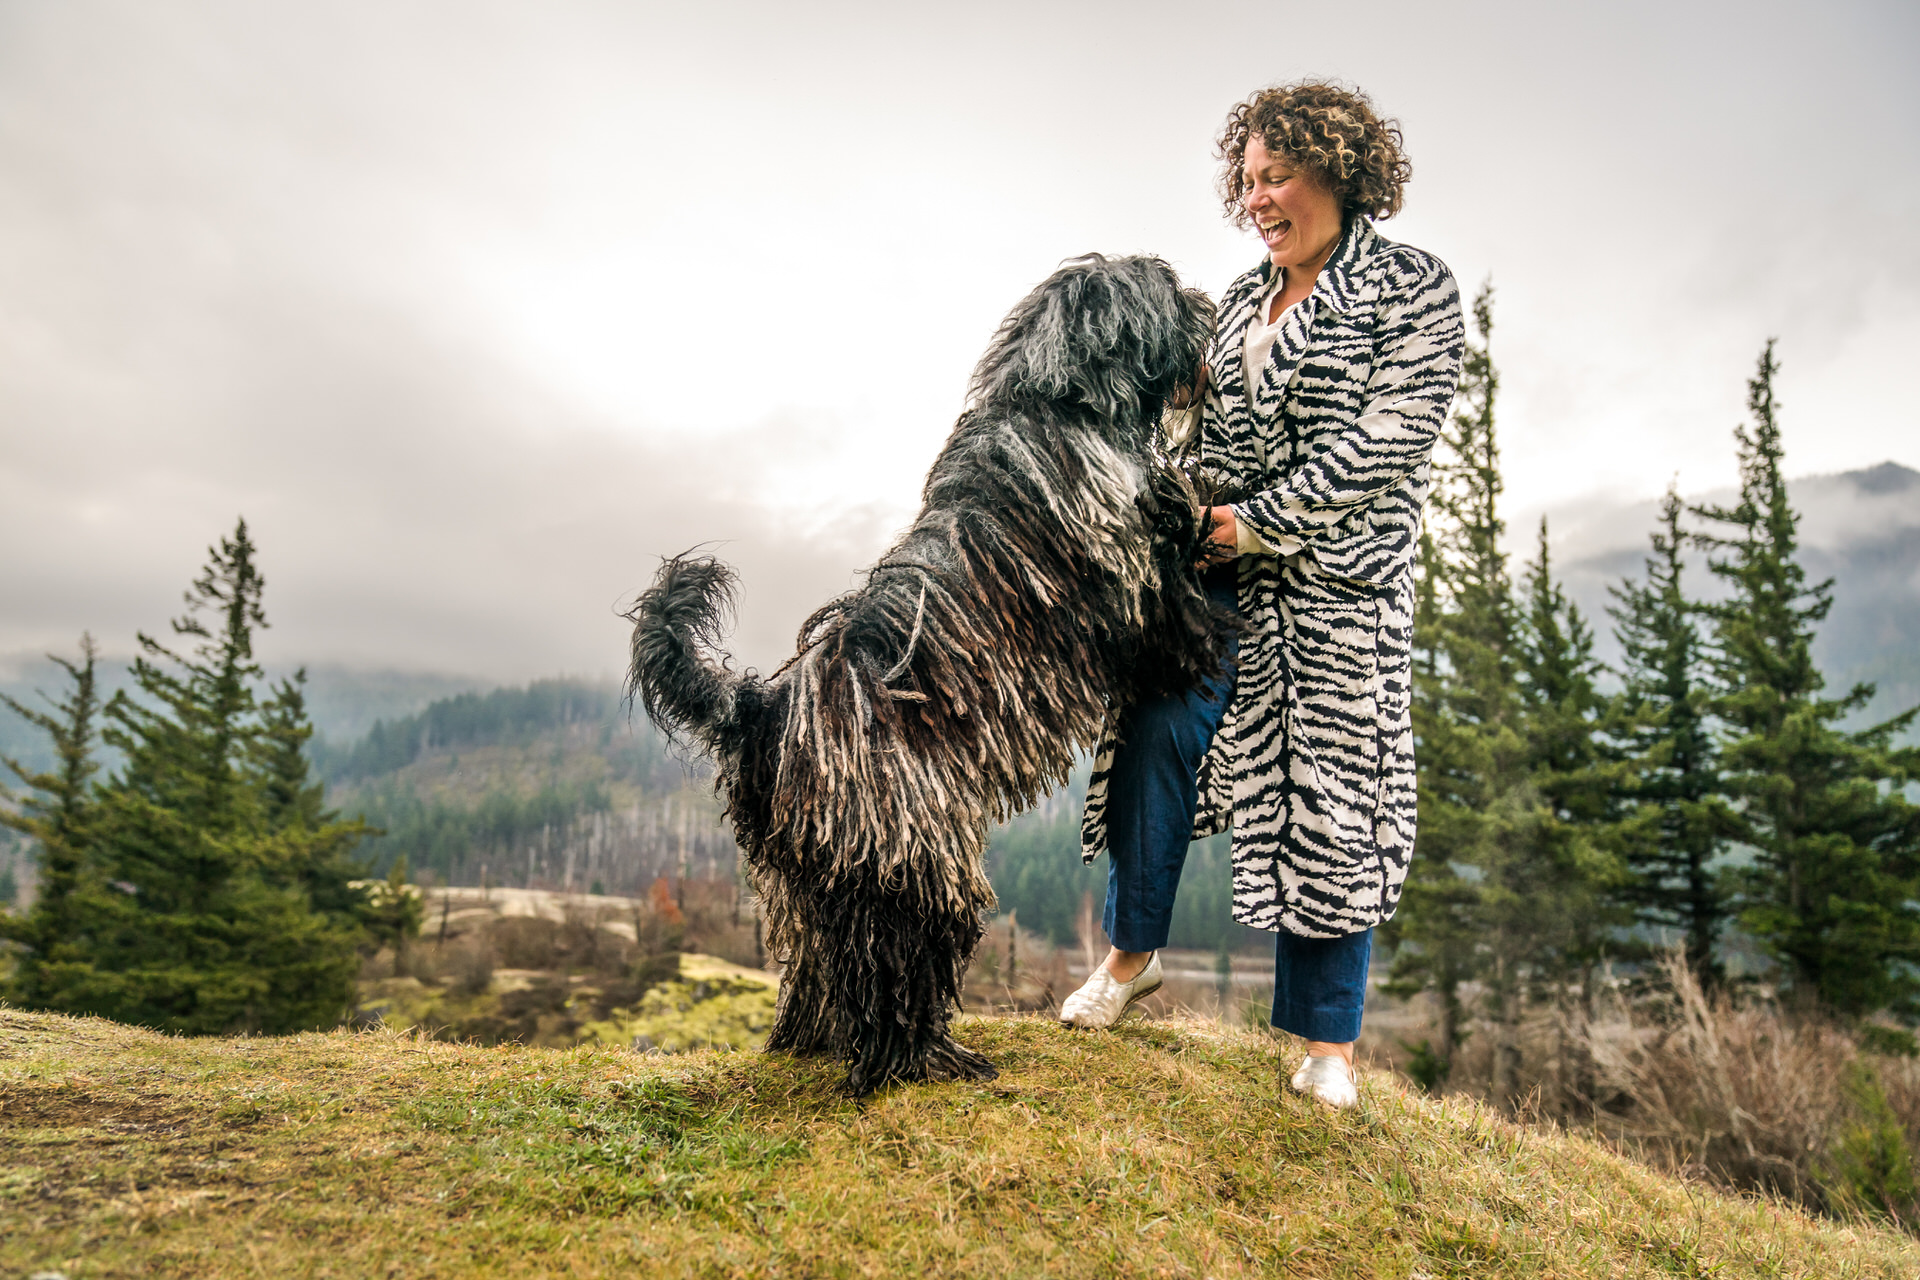 Woman dancing with her Bergamasco dog